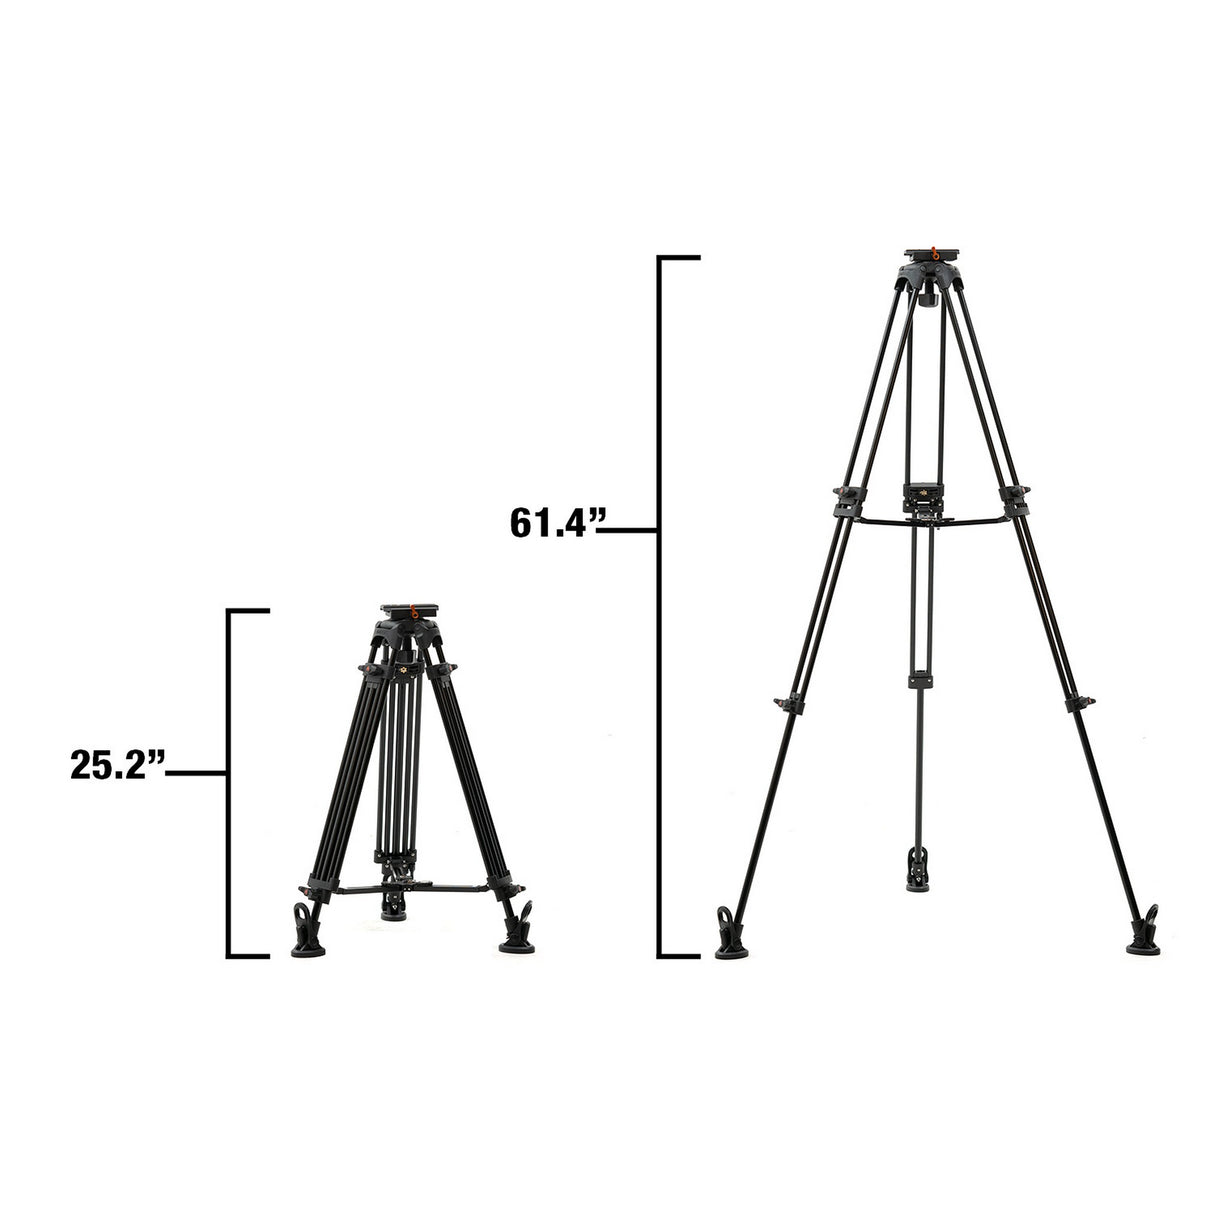 E-Image GA752S-PTZ Aluminum Tripod with 75mm Flat Base and Quick Release for PTZ Cameras